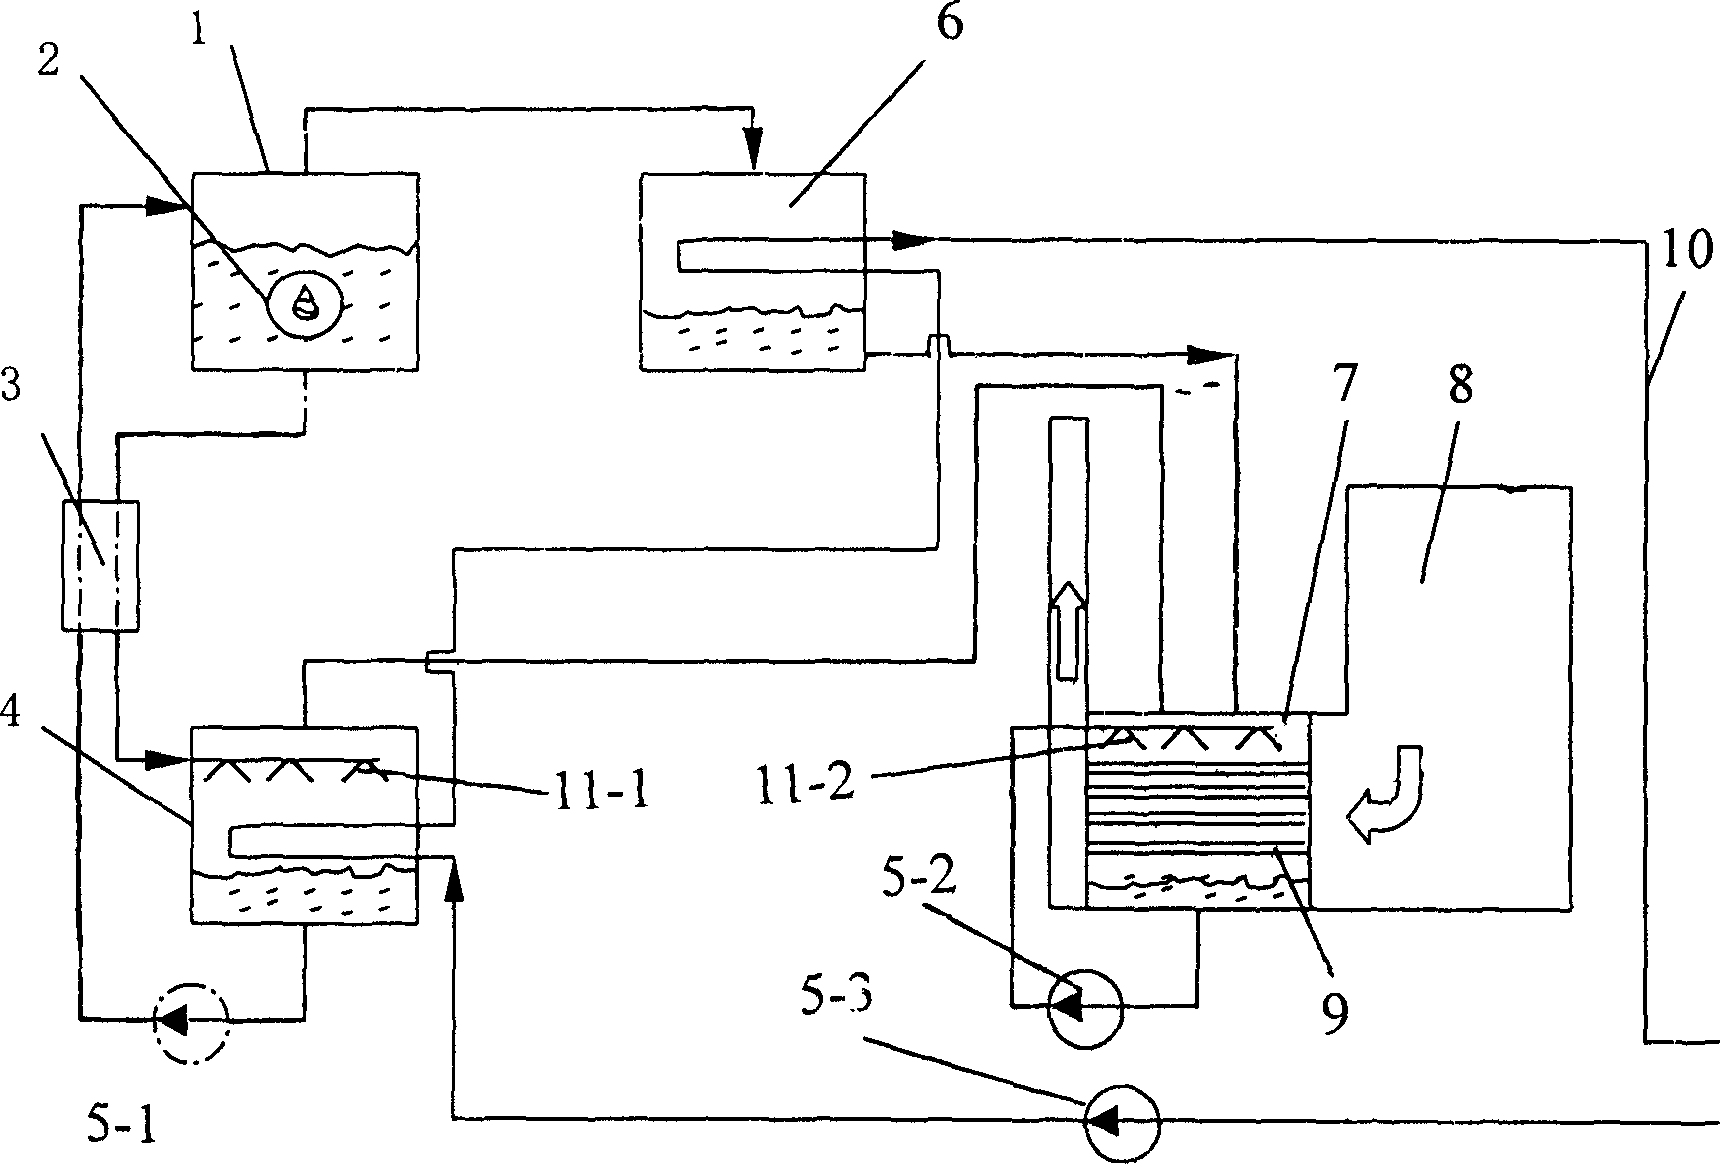 Heat supply device capable of recovering aqueous vapour latent heat in fuel gas, fuel oil boiler flue gas